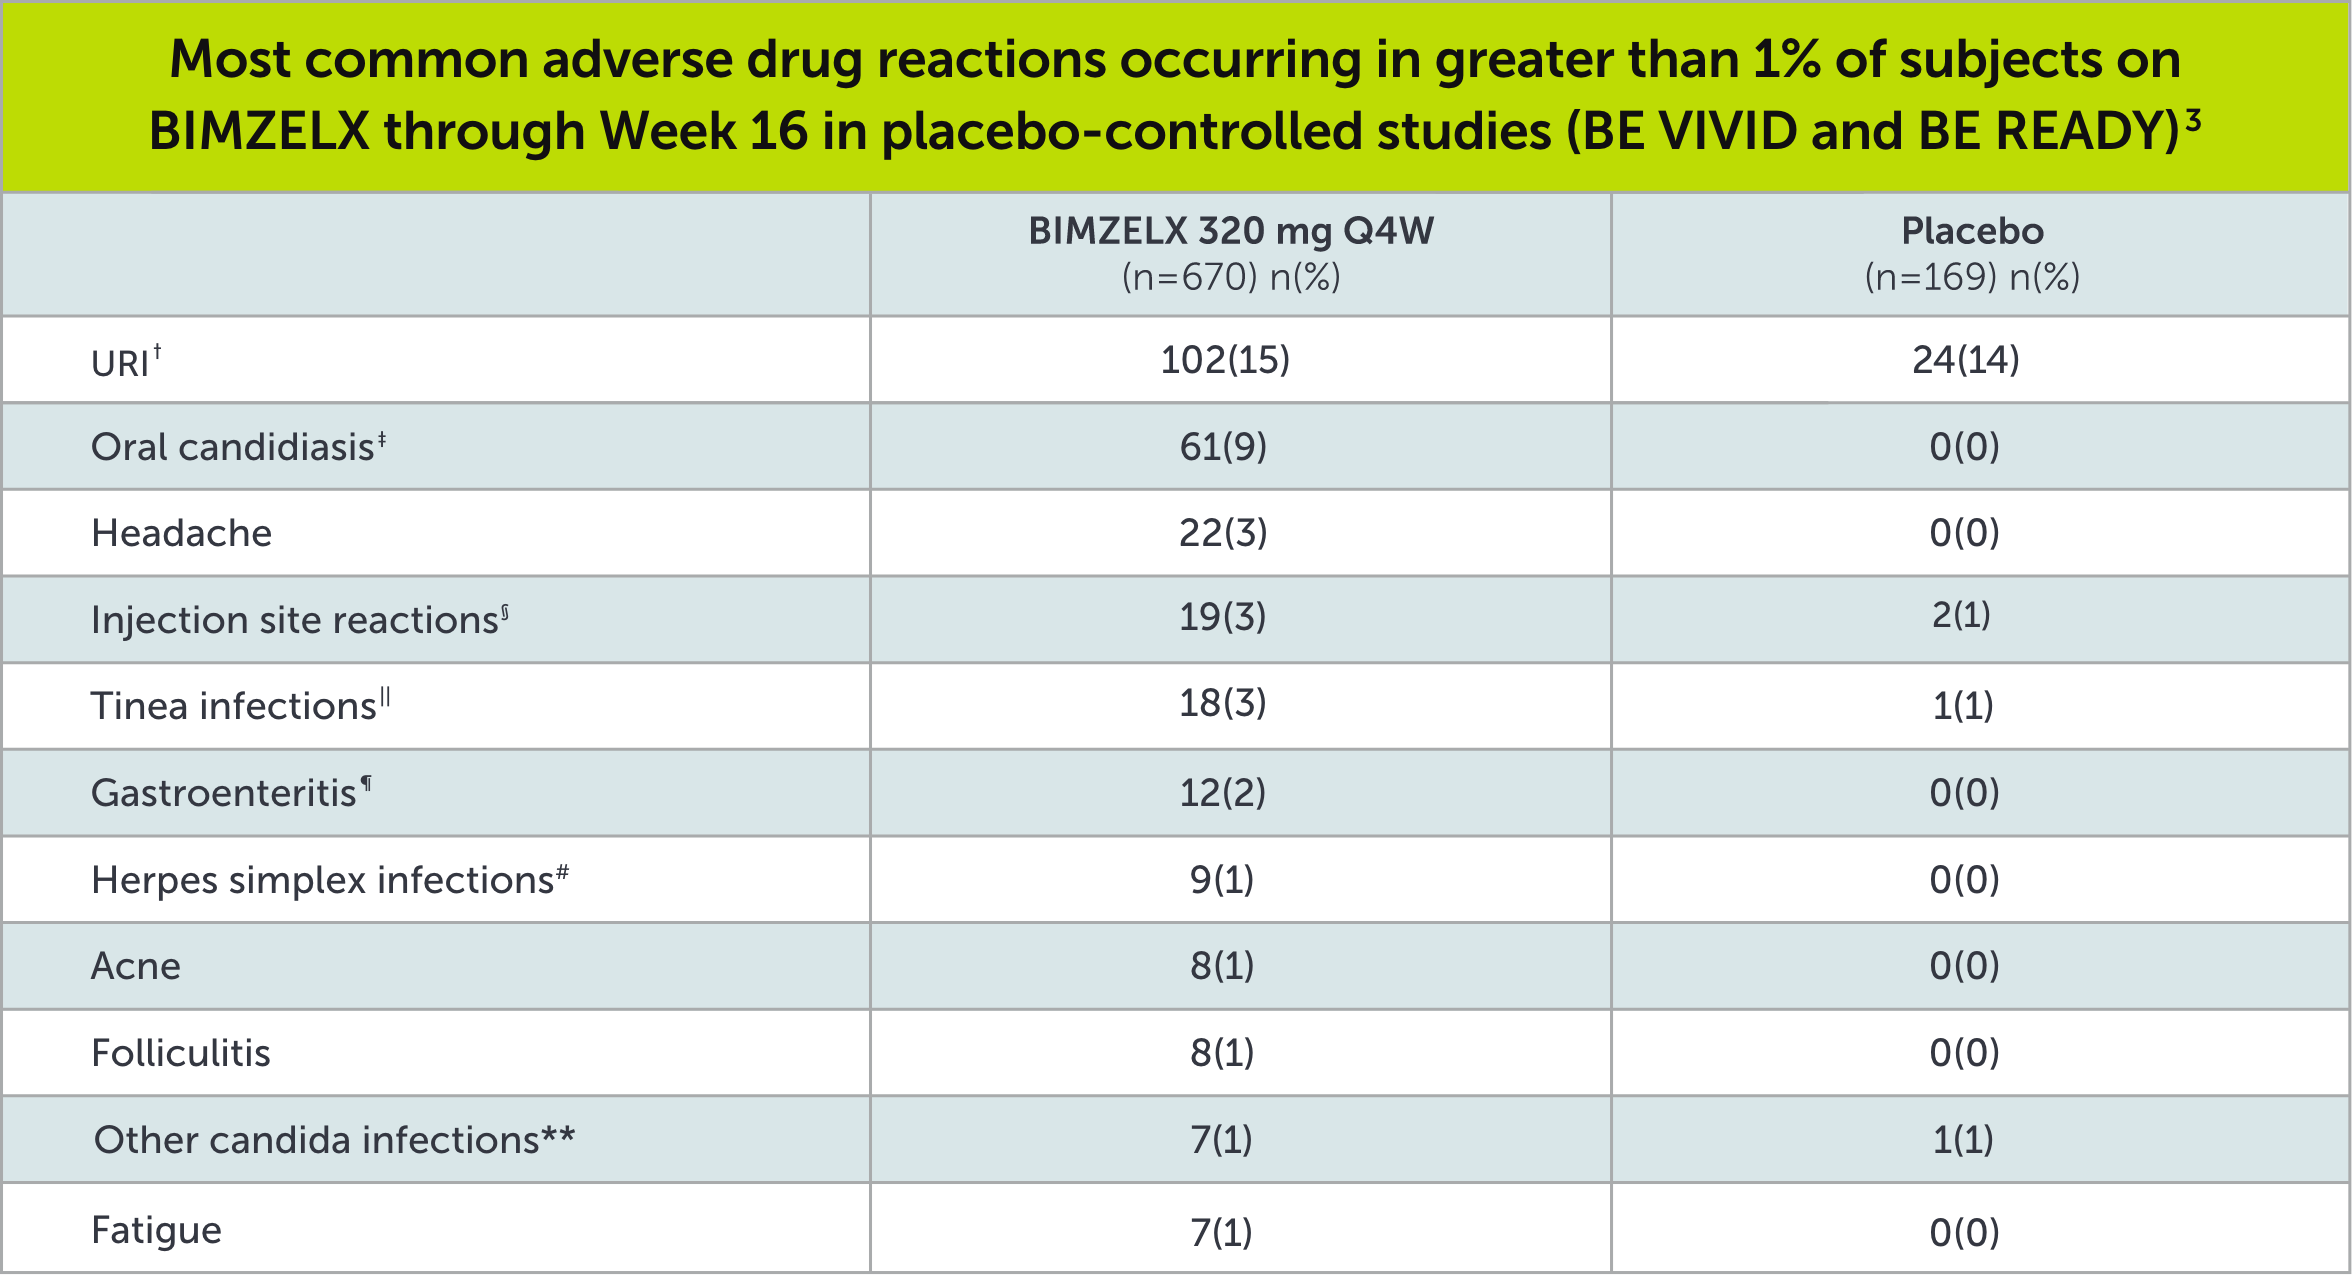 Lime green and light blue chart covering the most common adverse drug reactions occurring in greater than 1% of subjects on BIMZELX through Week 16 in placebo- controlled studies (BE VIVID and BE READY)